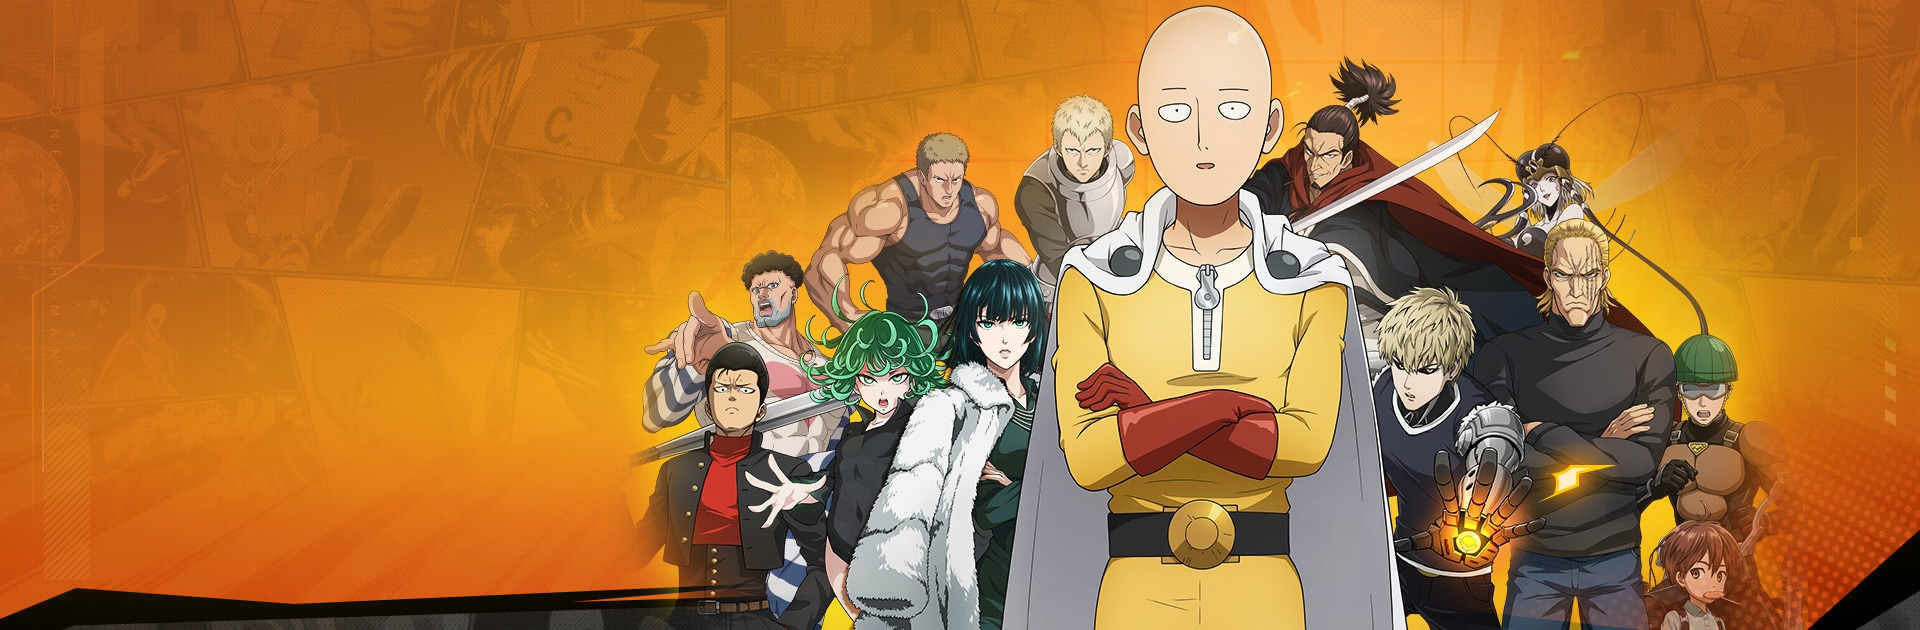 Download One-Punch Man: Road to Hero 2.0 on PC with BlueStacks